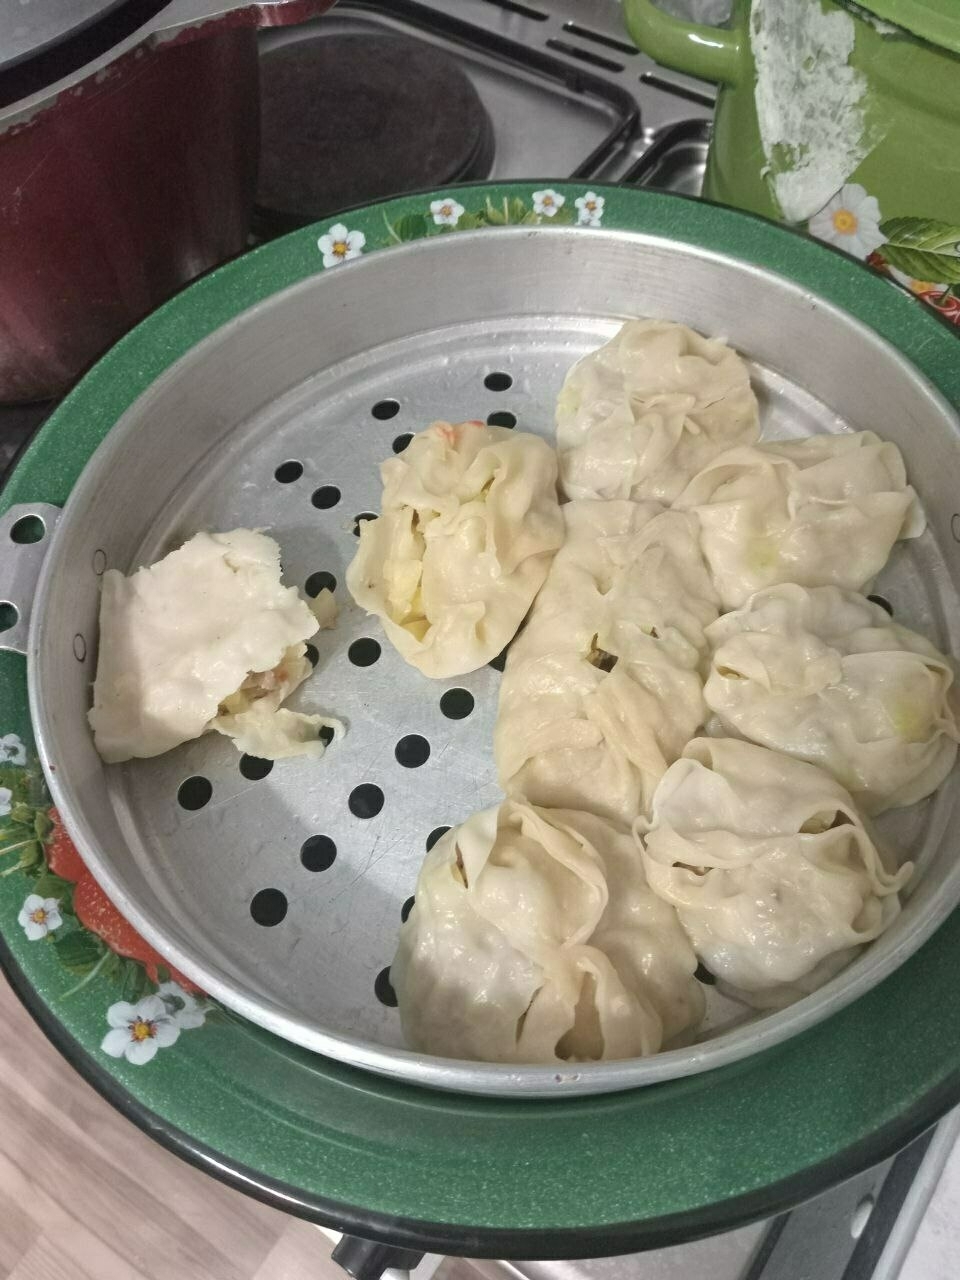 8 dumplings in a gray steamer dish in a green, ceramic bowl sitting on the stovetop